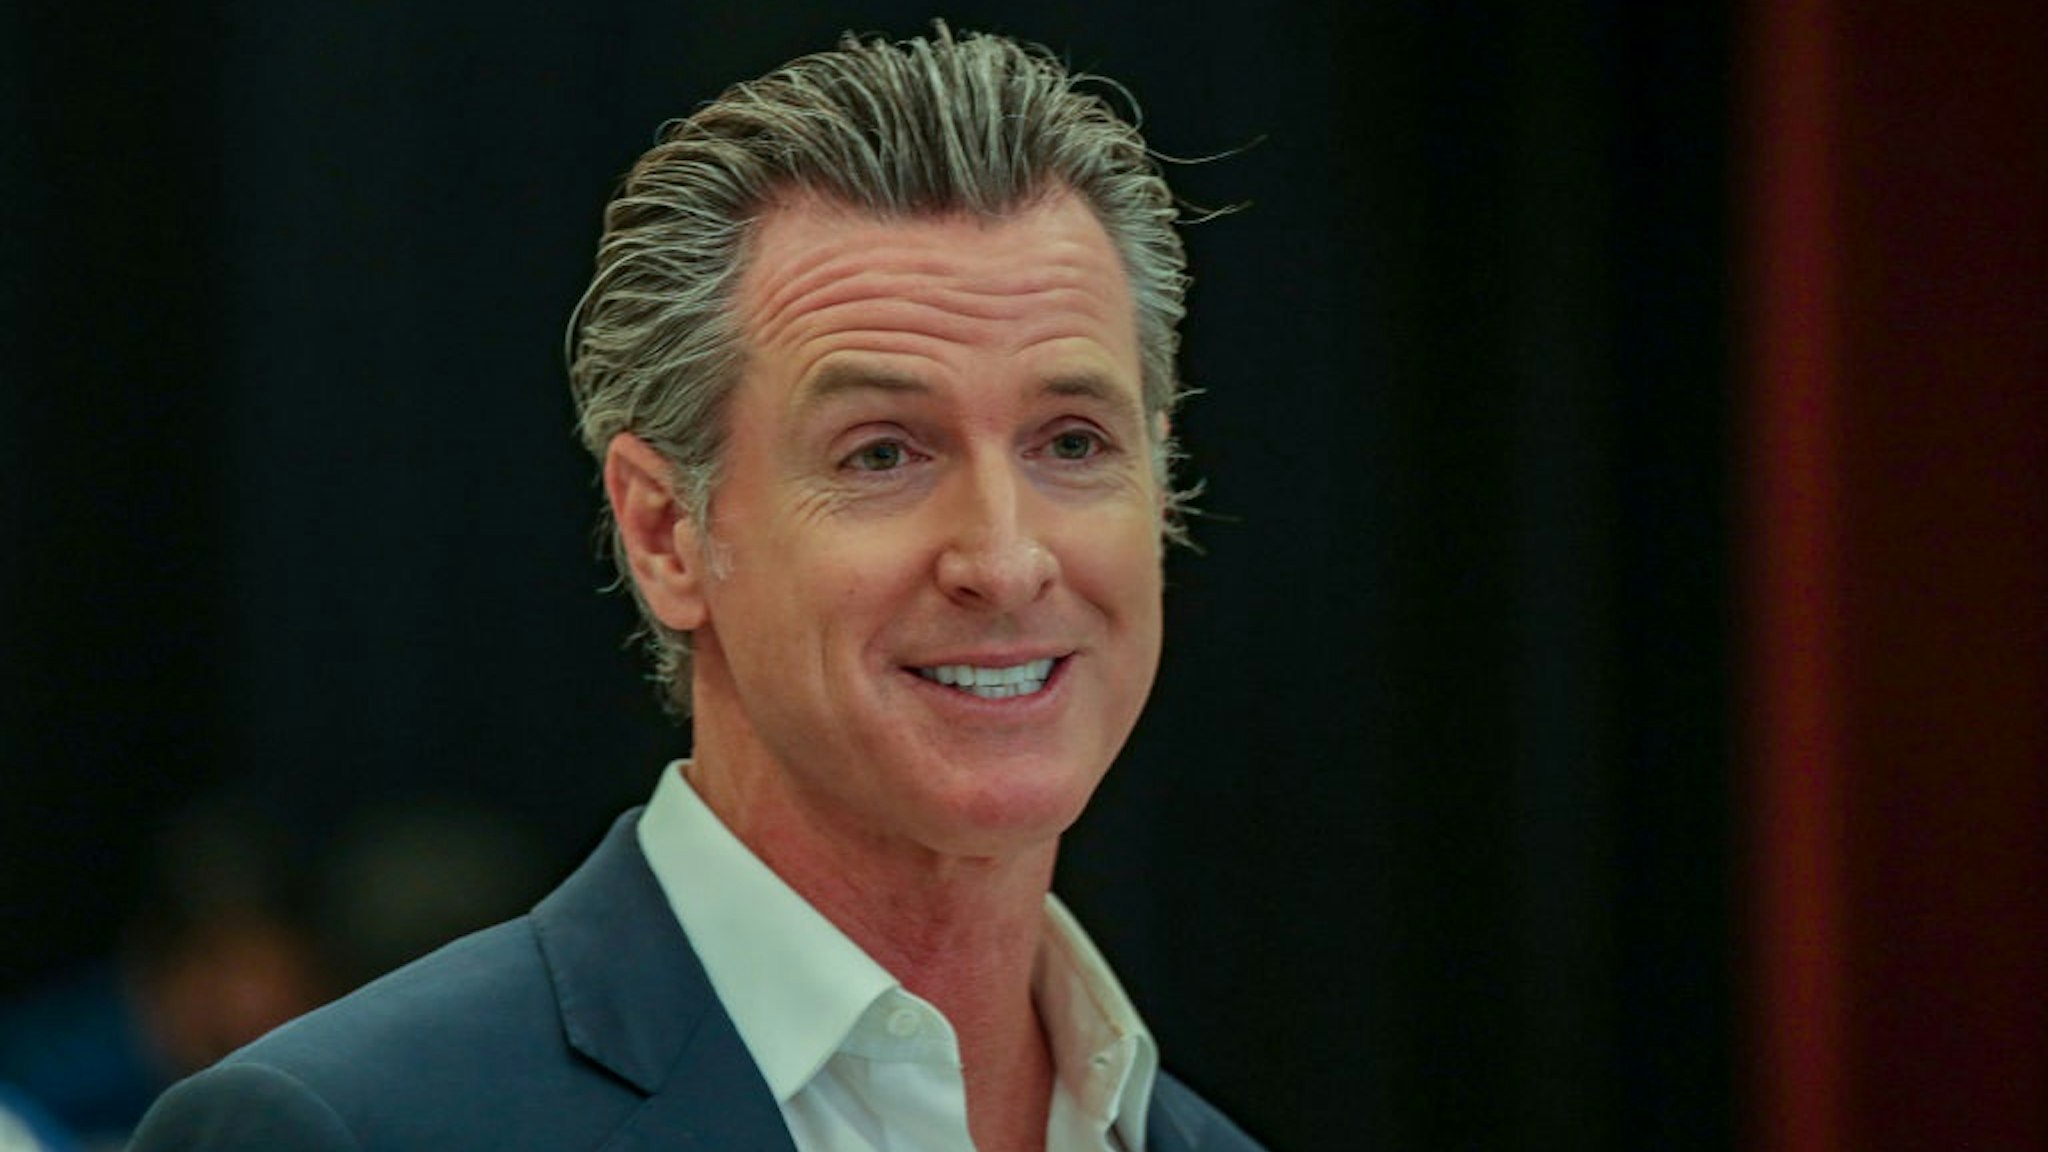 Bell Gardens, CA - July 14: Gov. Gavin Newsom presents the nation's largest rent relief program as Part of the $100 Billion California Comeback Plan.